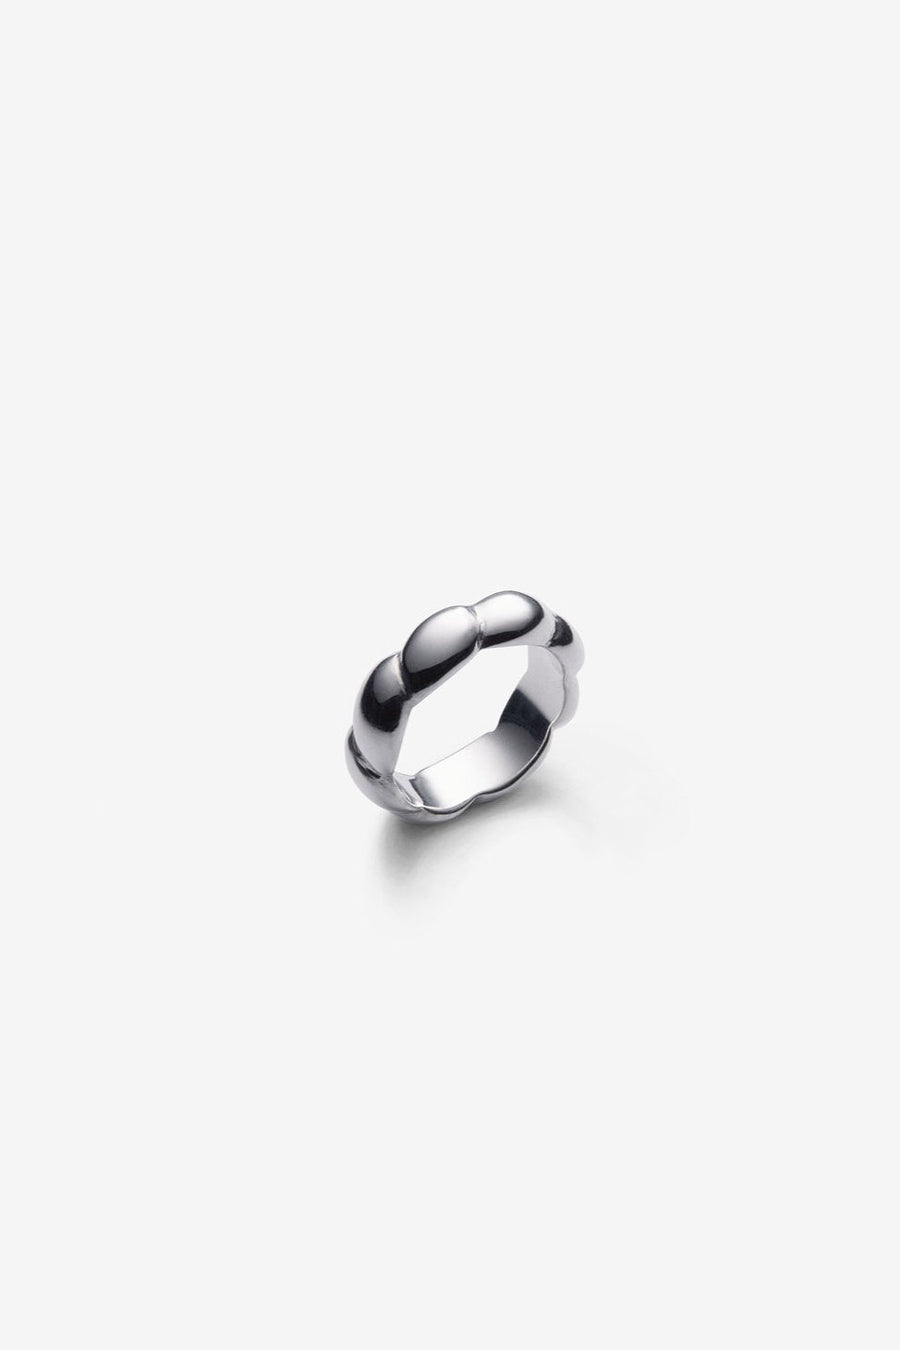 HELENA ROHNER - Thin Curly Ring in Silver